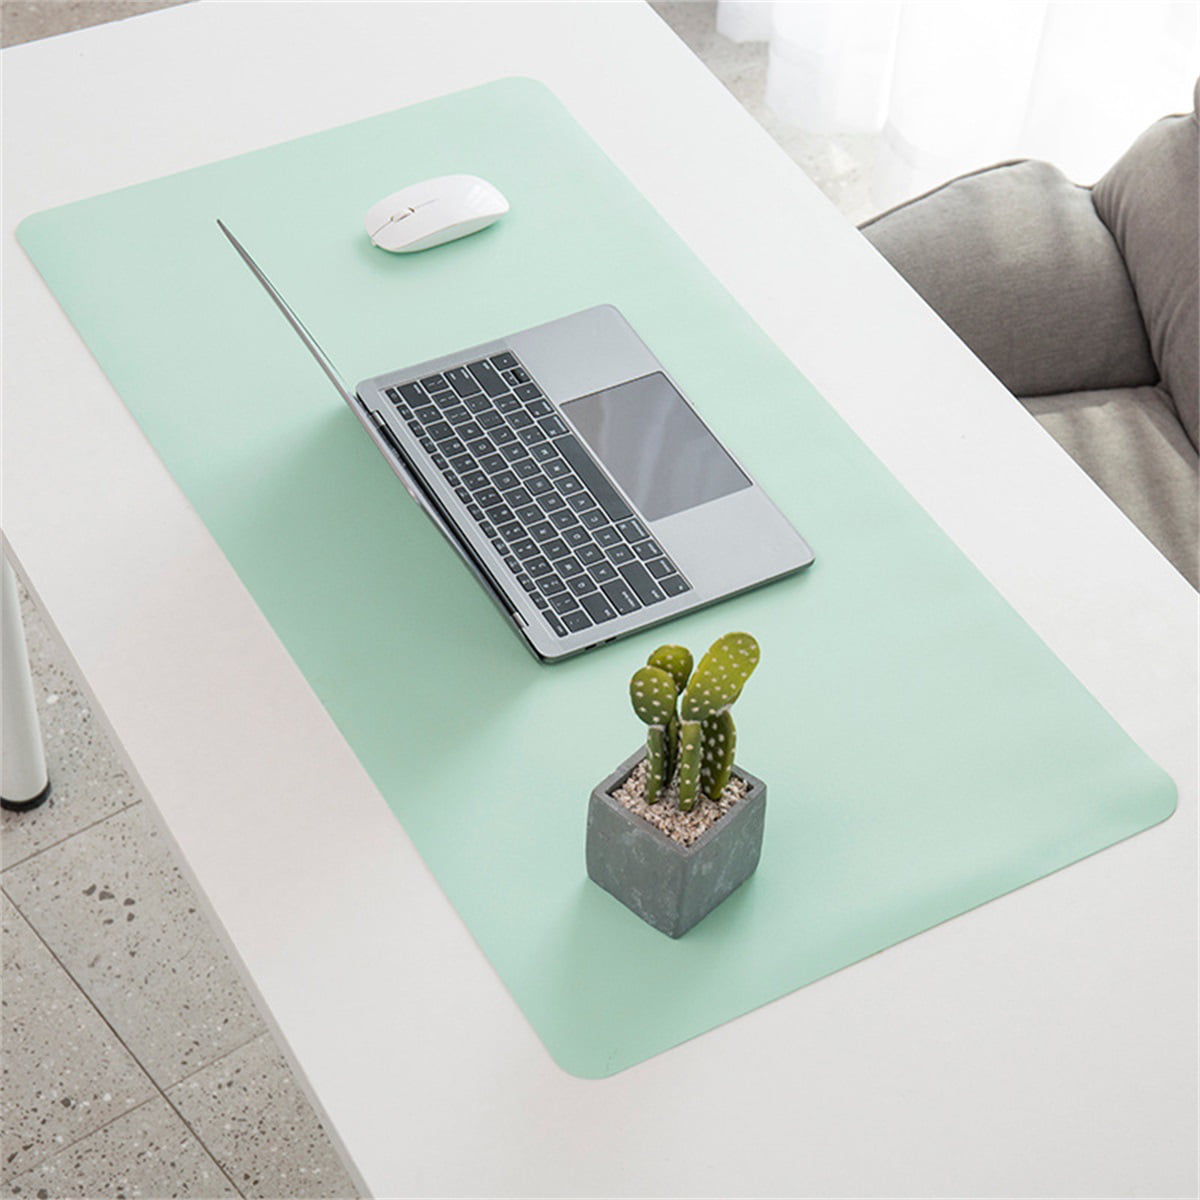 Introducing Mouse Pads and Desk Mats